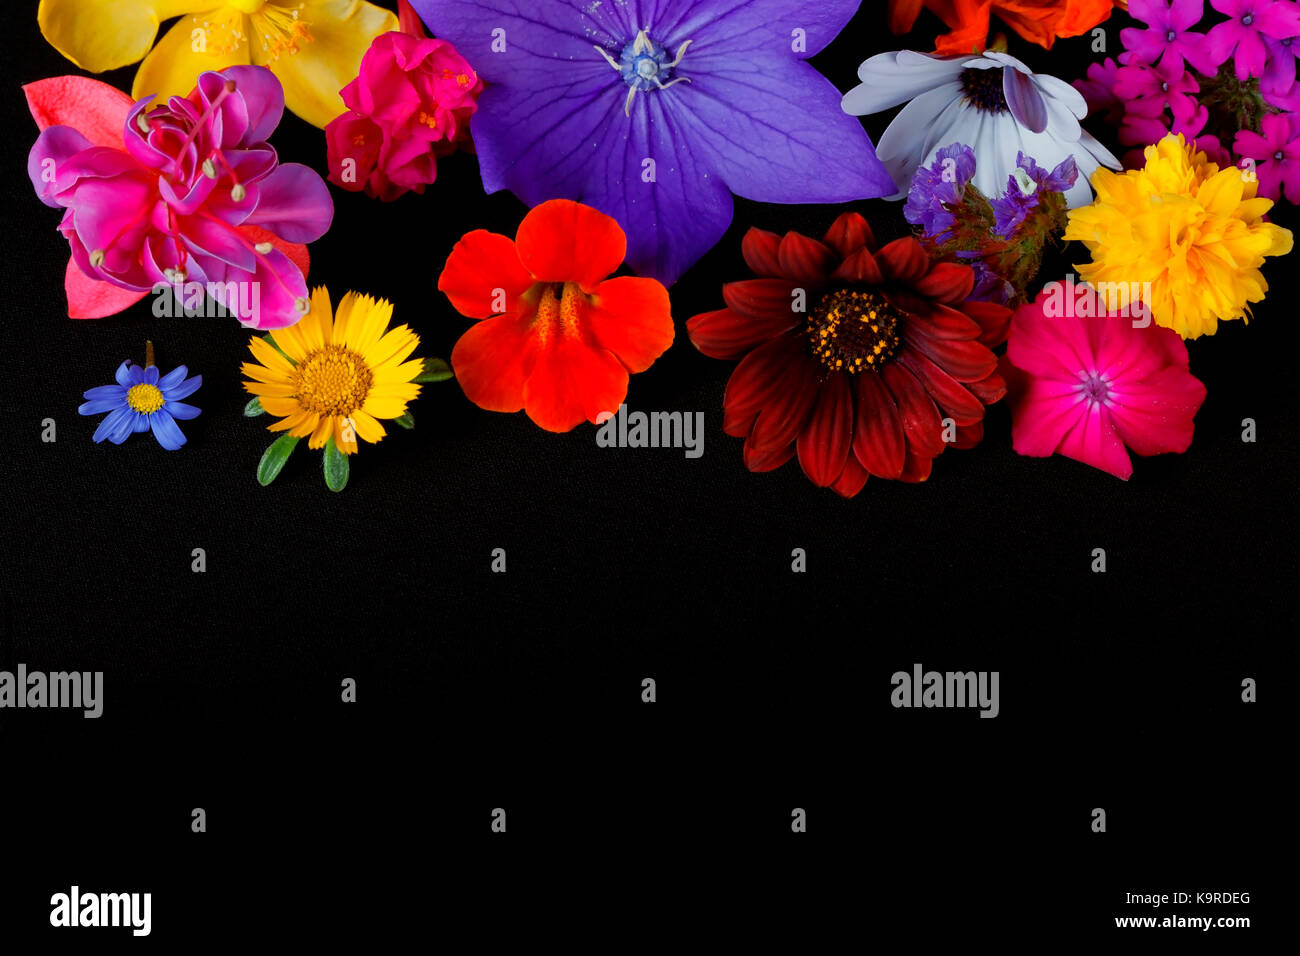 Many flowers of different species and colors on black background. Stock Photo